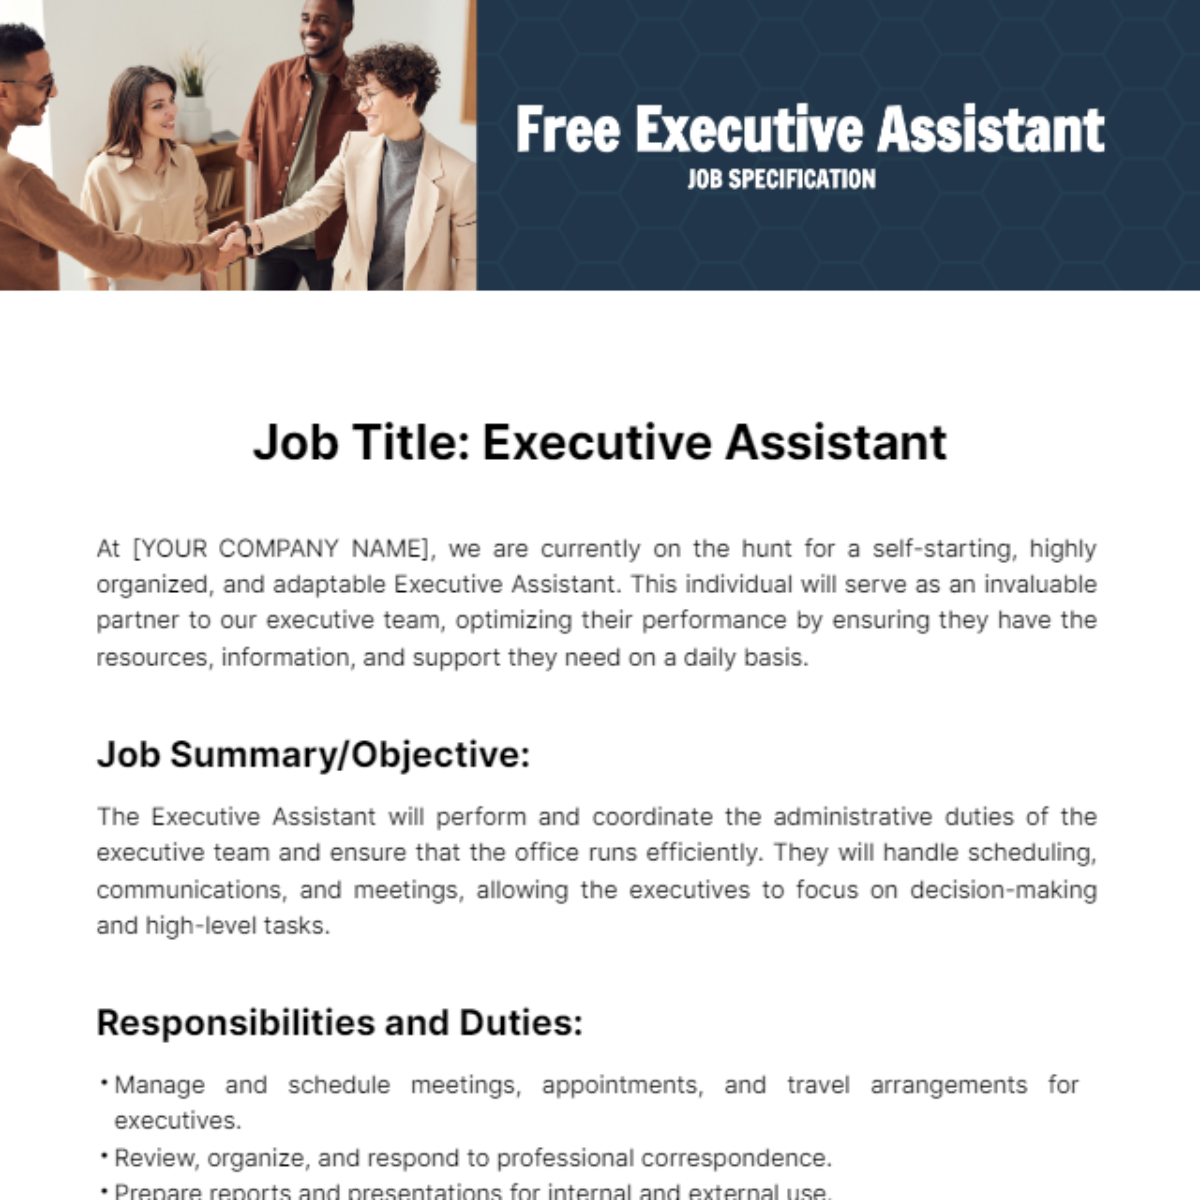 Free Executive Assistant Job Specification Template